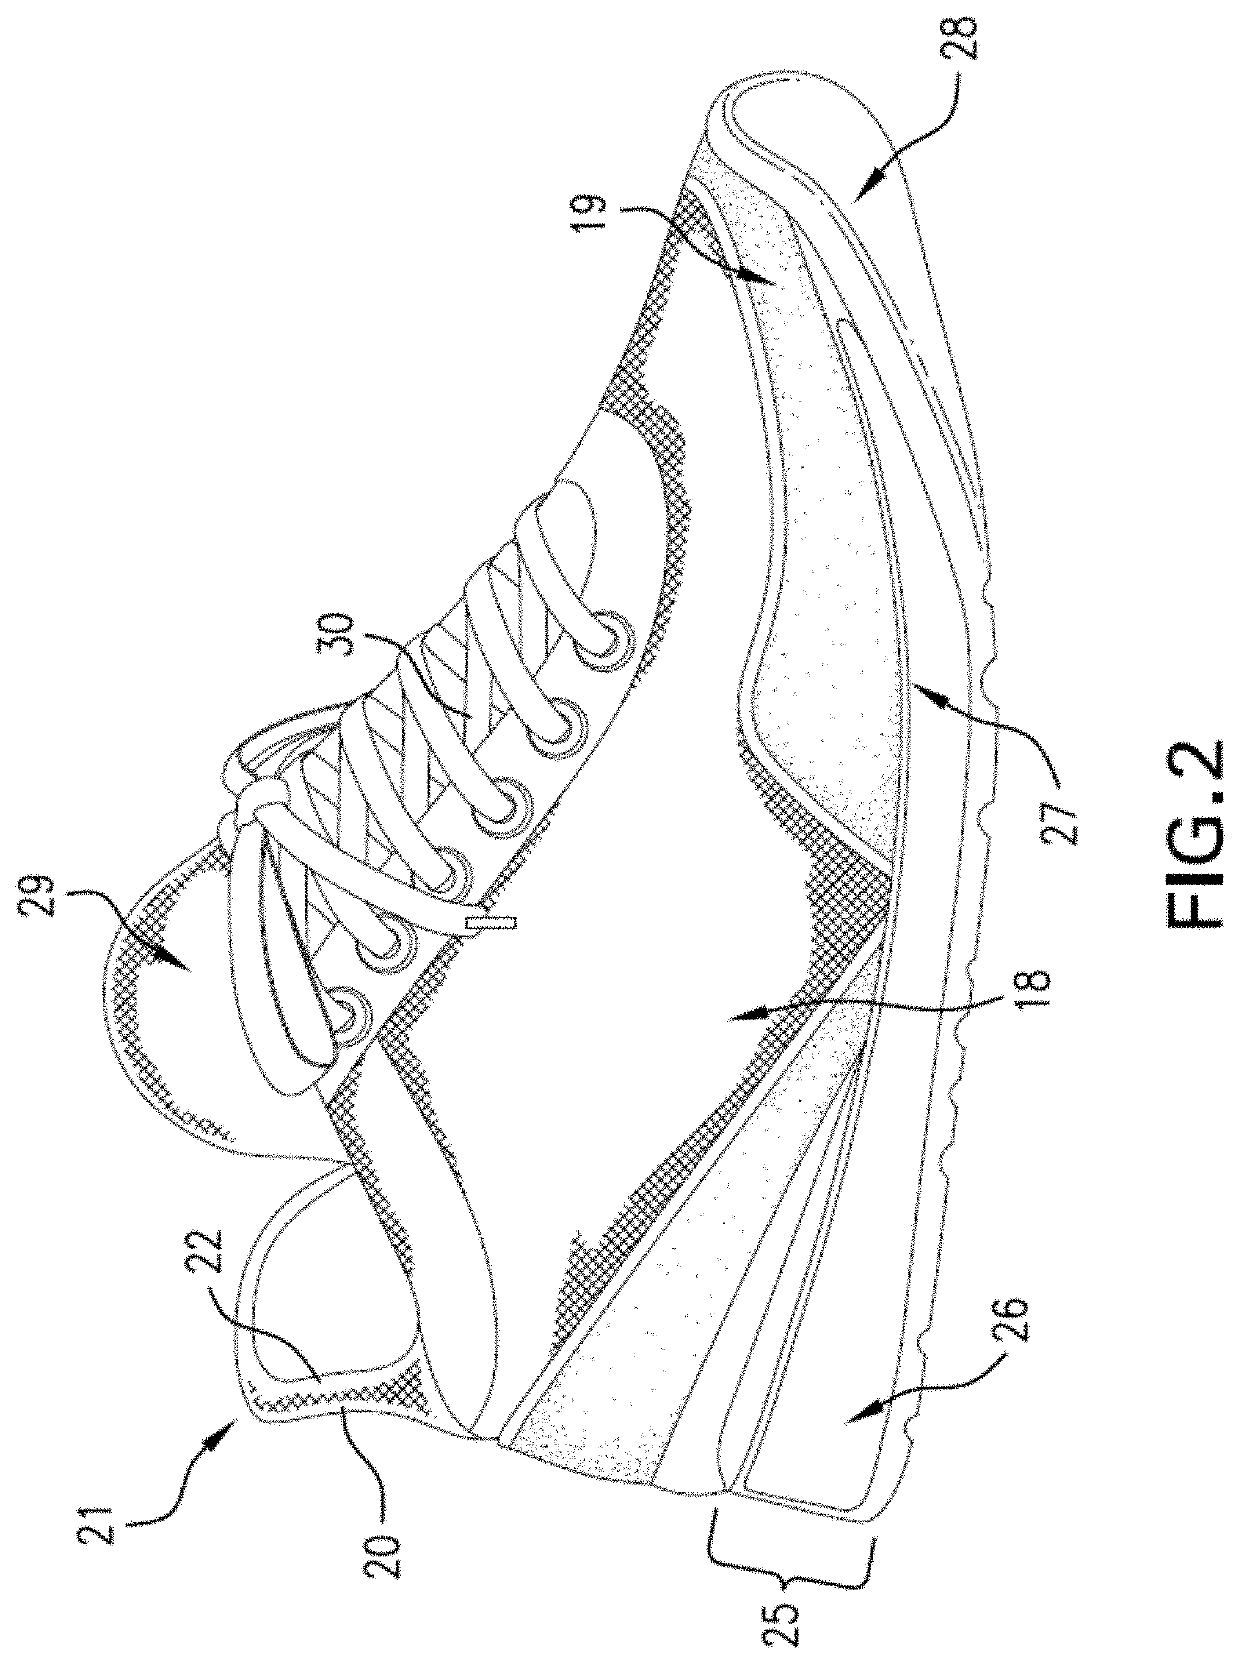 Vertically lapped nonwoven in footwear